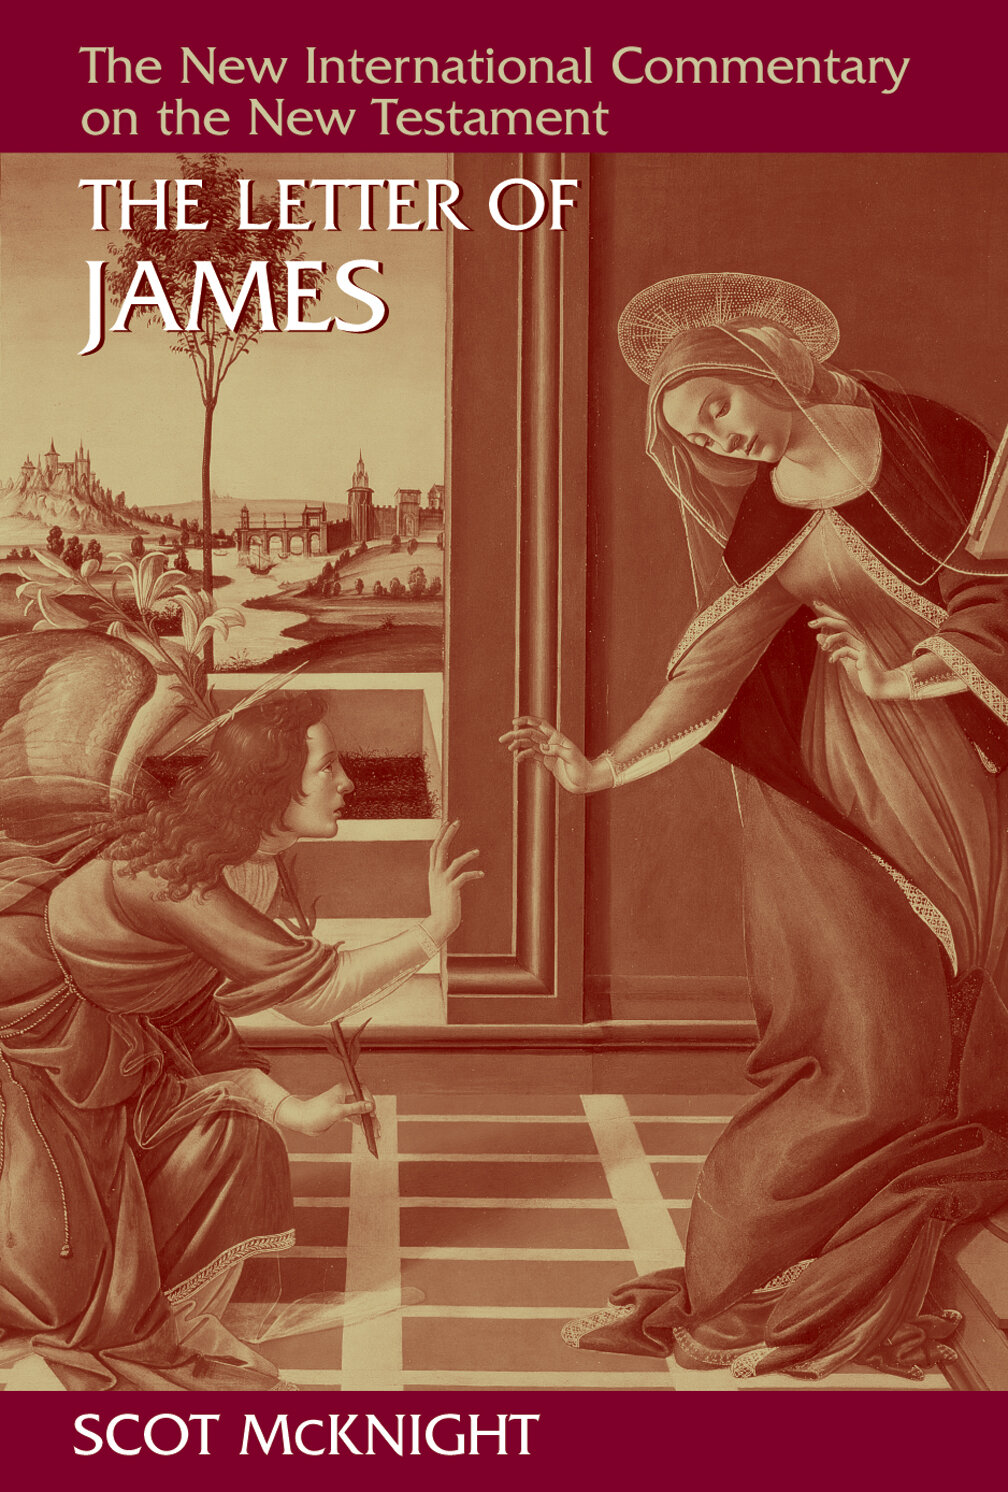 The Letter of James (The New International Commentary on the New Testament | NICNT)